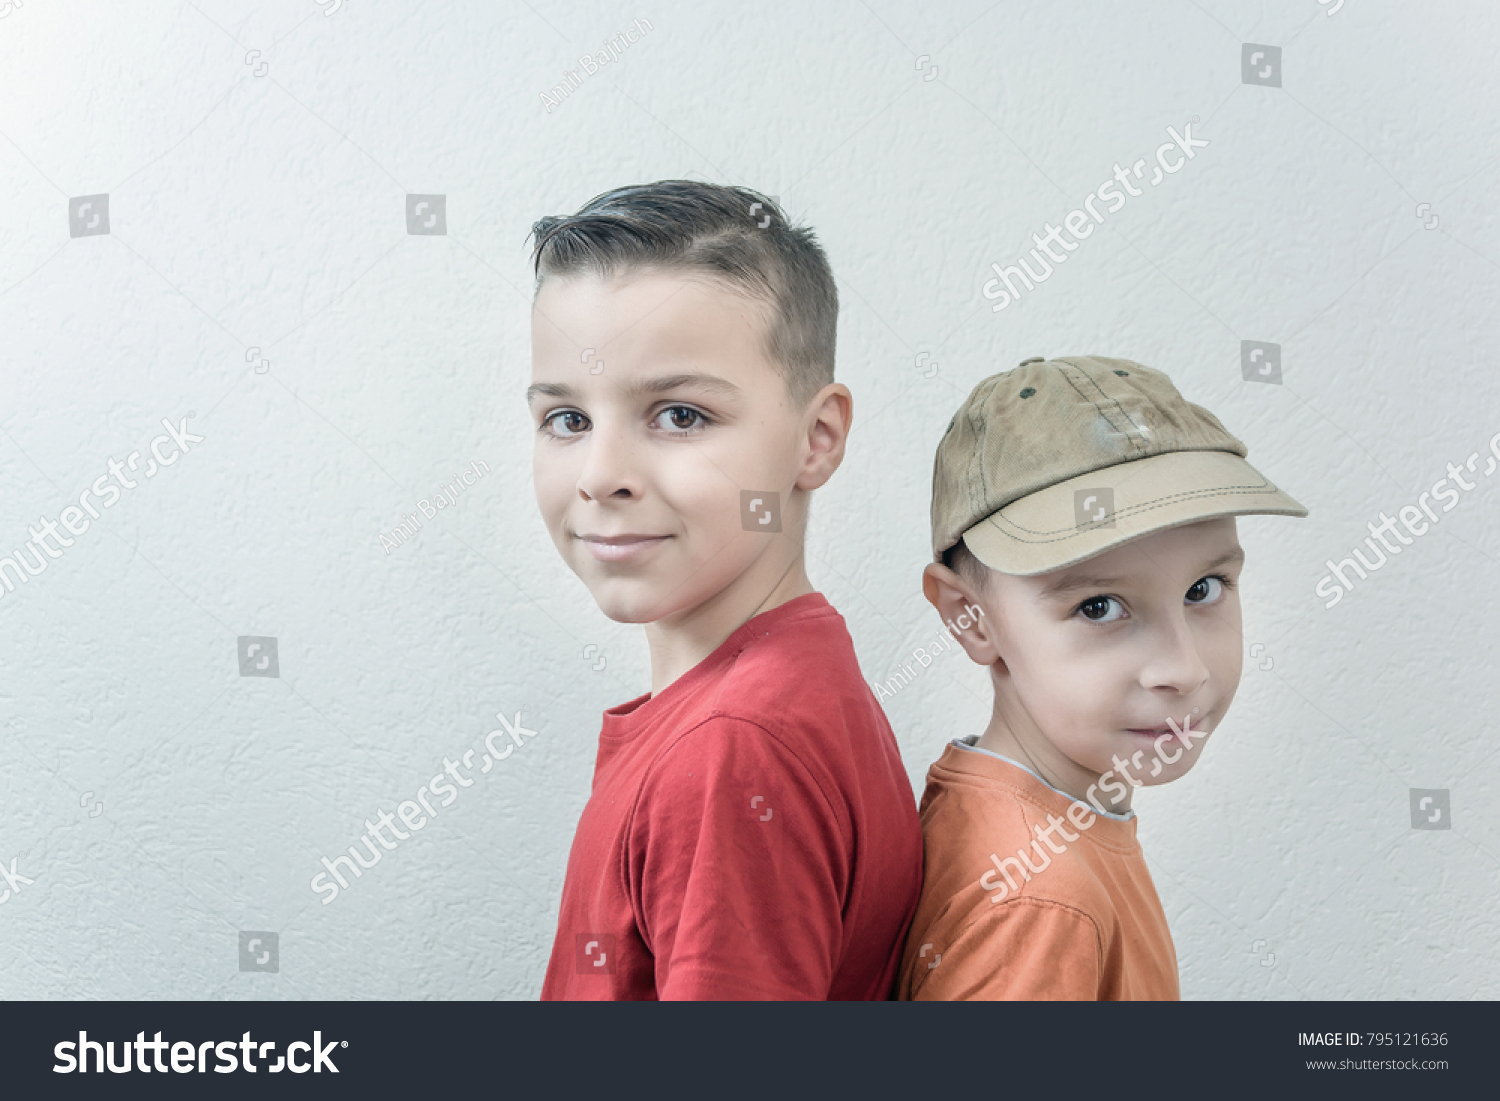 Two Boys Standing Next Each Other Stock Photo 795121636 Shutterstock